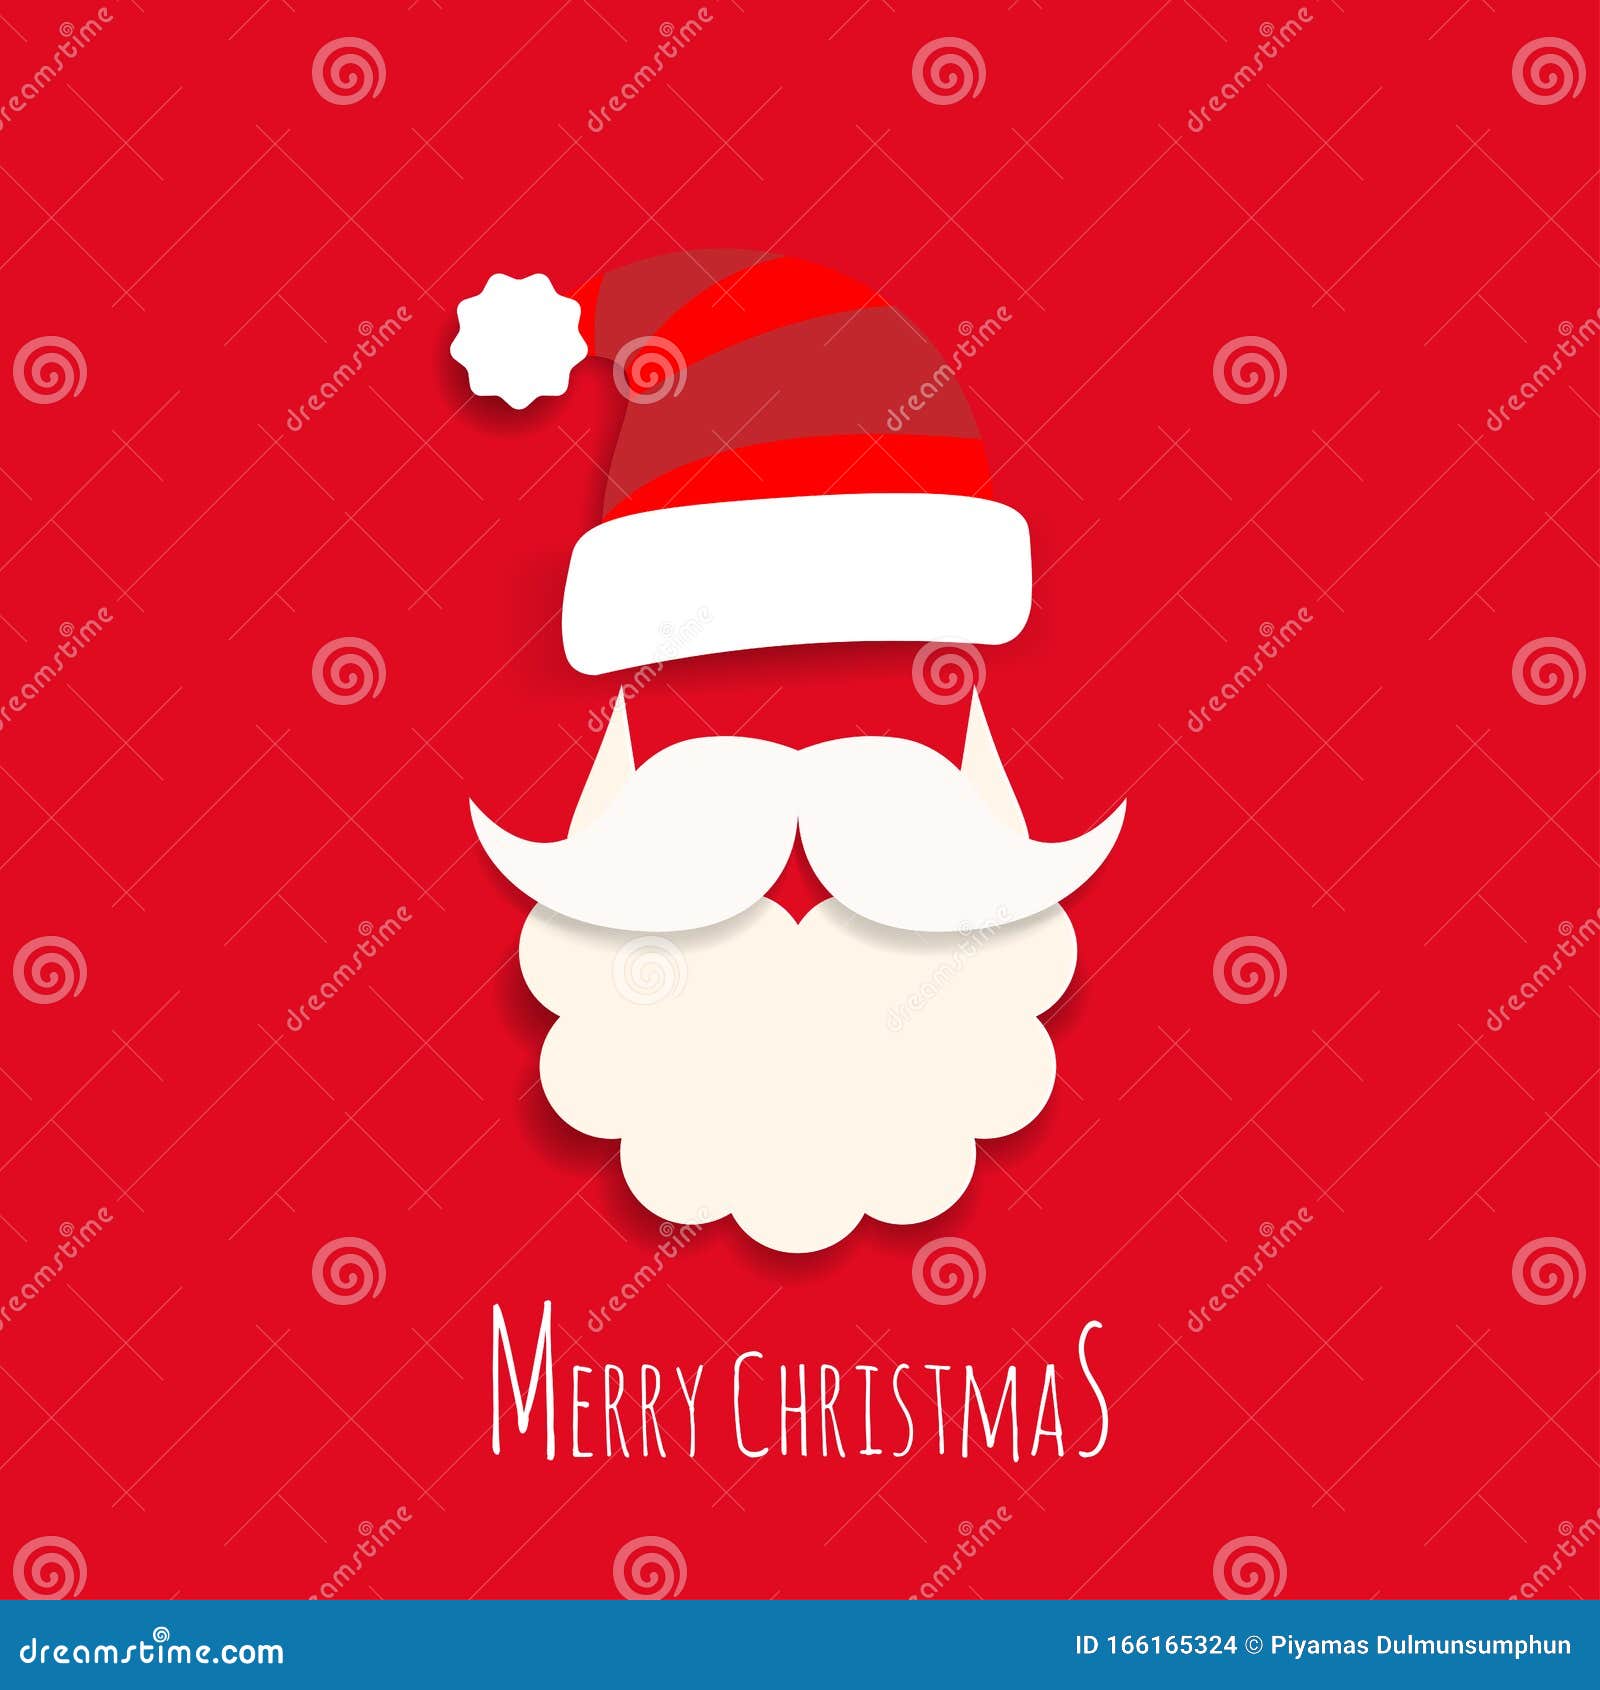 Cute Santa Claus Characterhappy Christmas Conceptdesign For Wallpaper And  Otherwith Space And Text Inputvectorillustration Stock Illustration -  Download Image Now - iStock